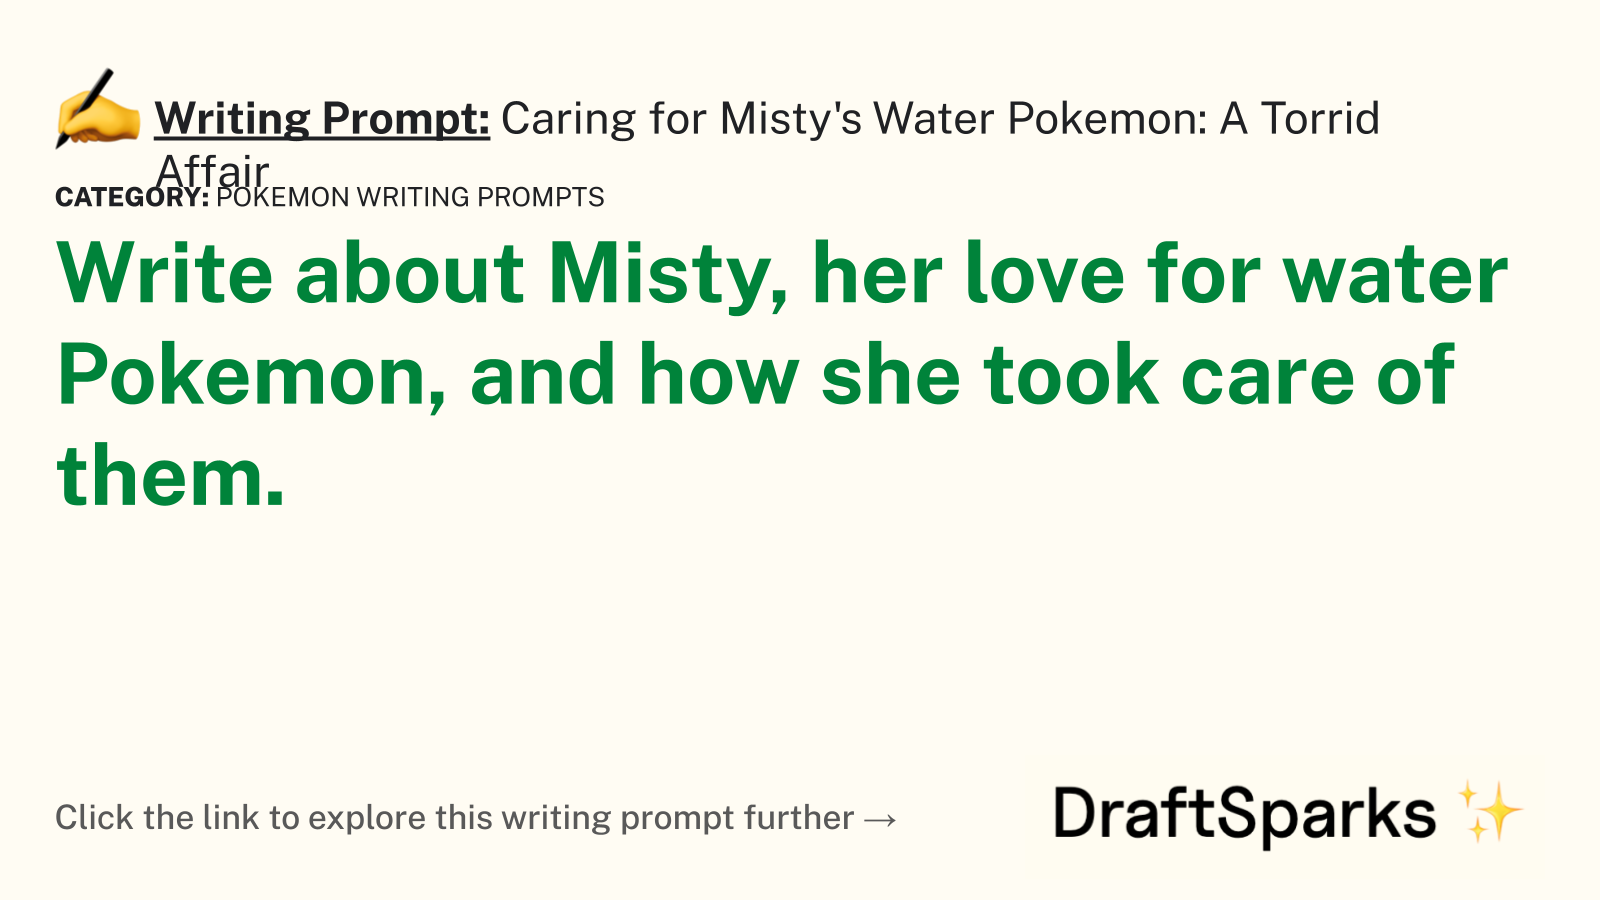 Caring for Misty’s Water Pokemon: A Torrid Affair